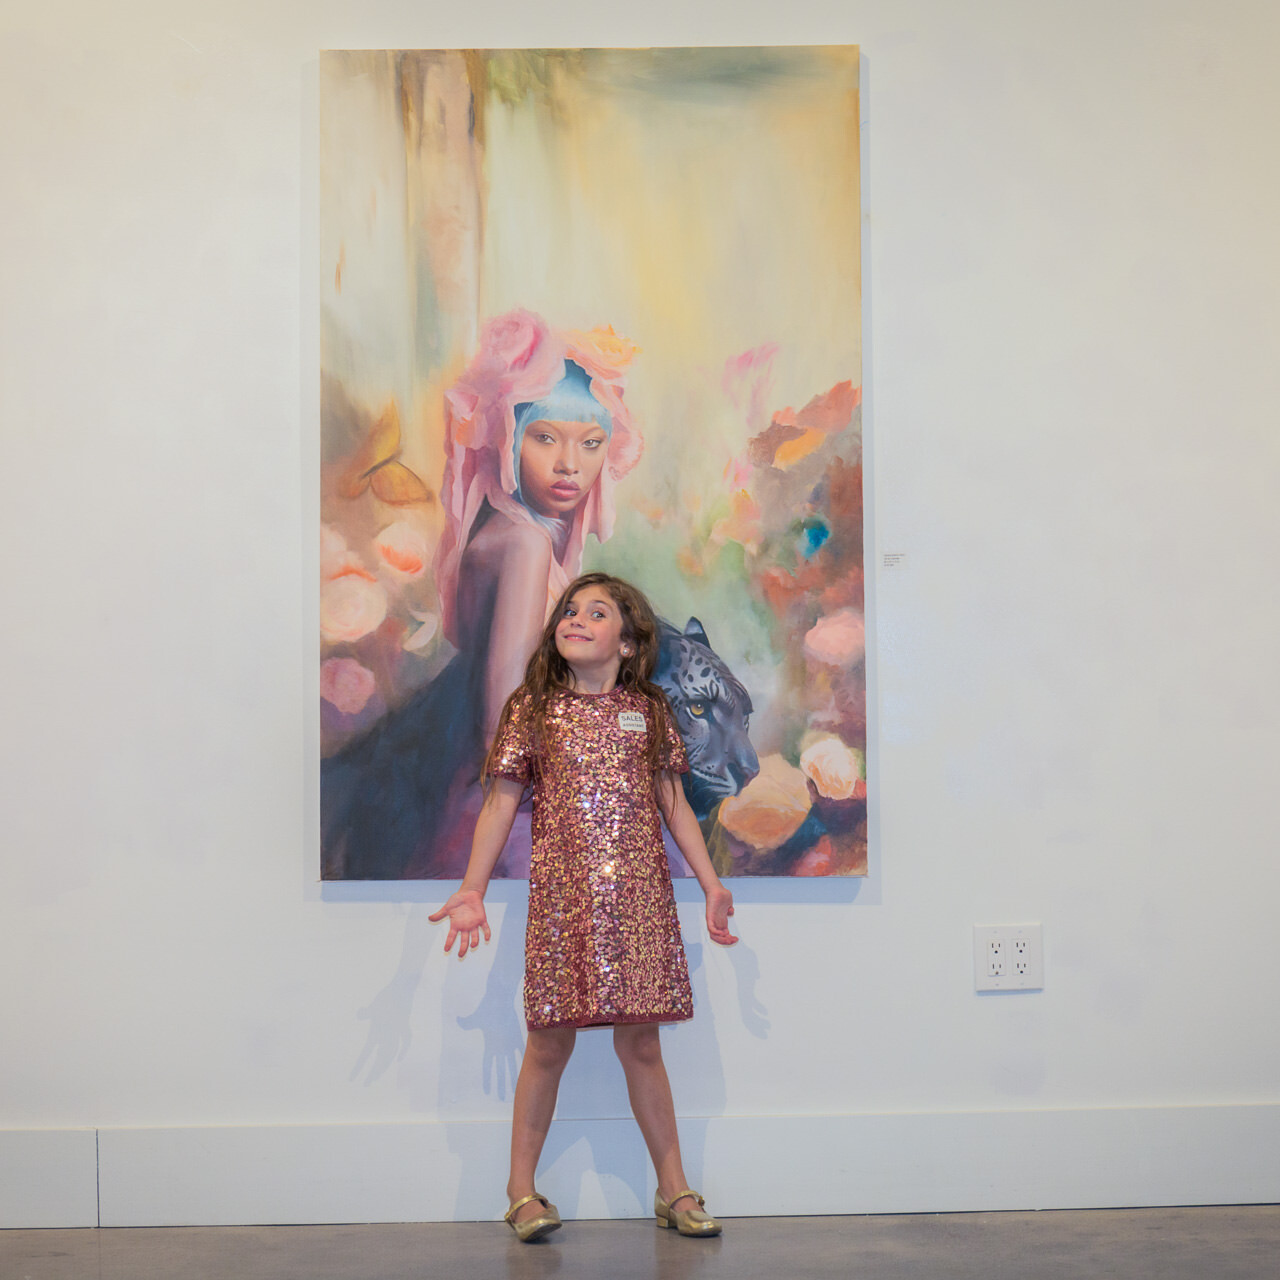 A delightful young visitor eagerly poses for a selfie with the 'Resilience' painting